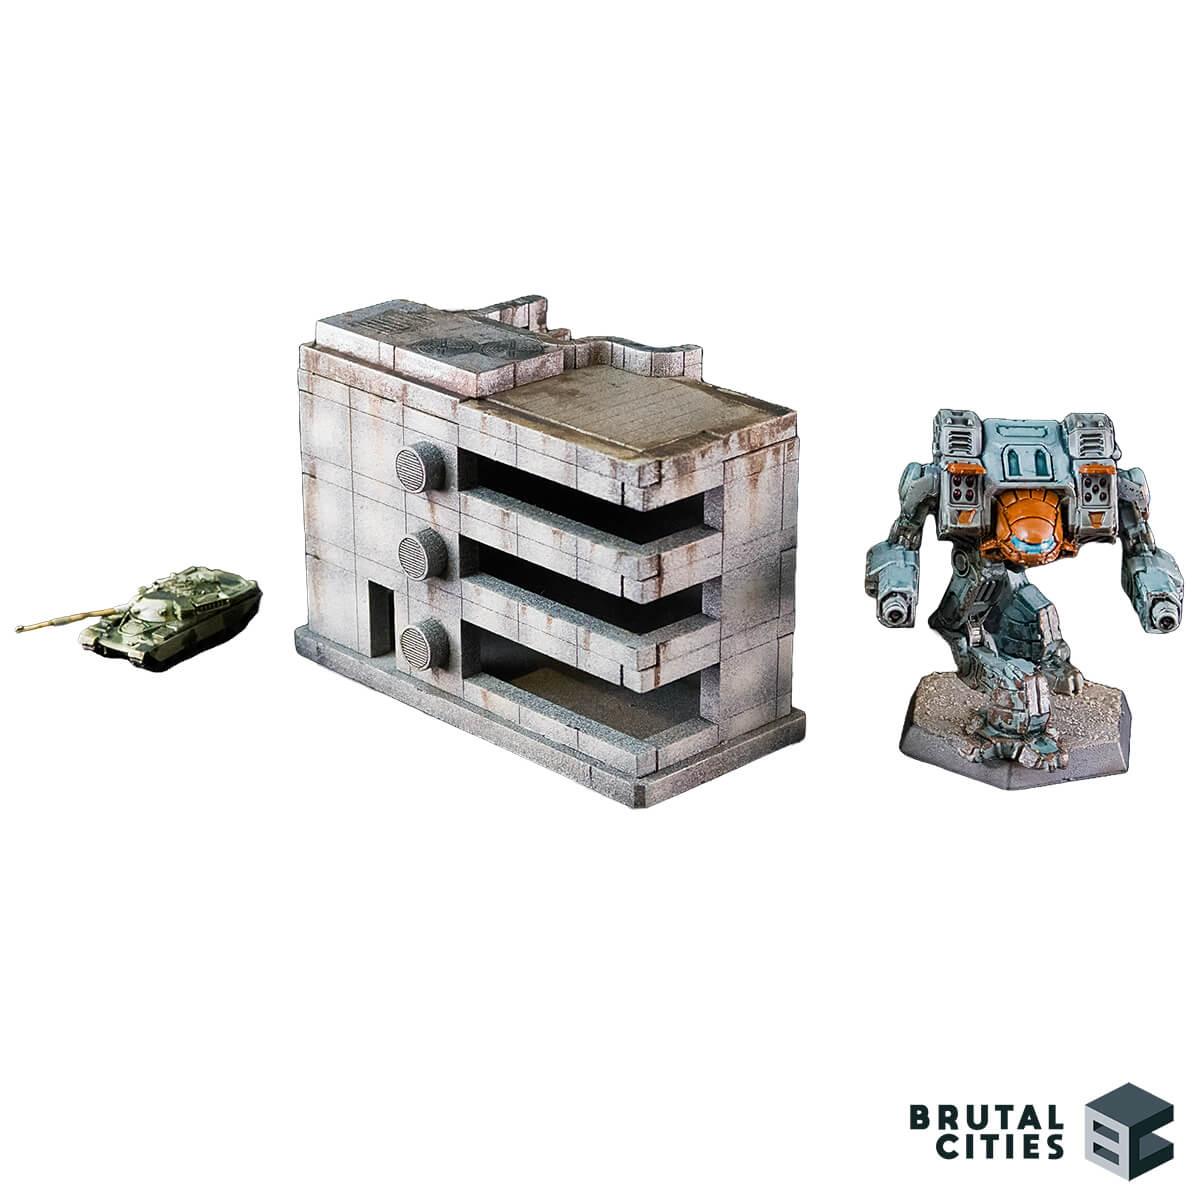 6mm Sci-fi Terrain office building - gray with battletech mech and Chieftain tank